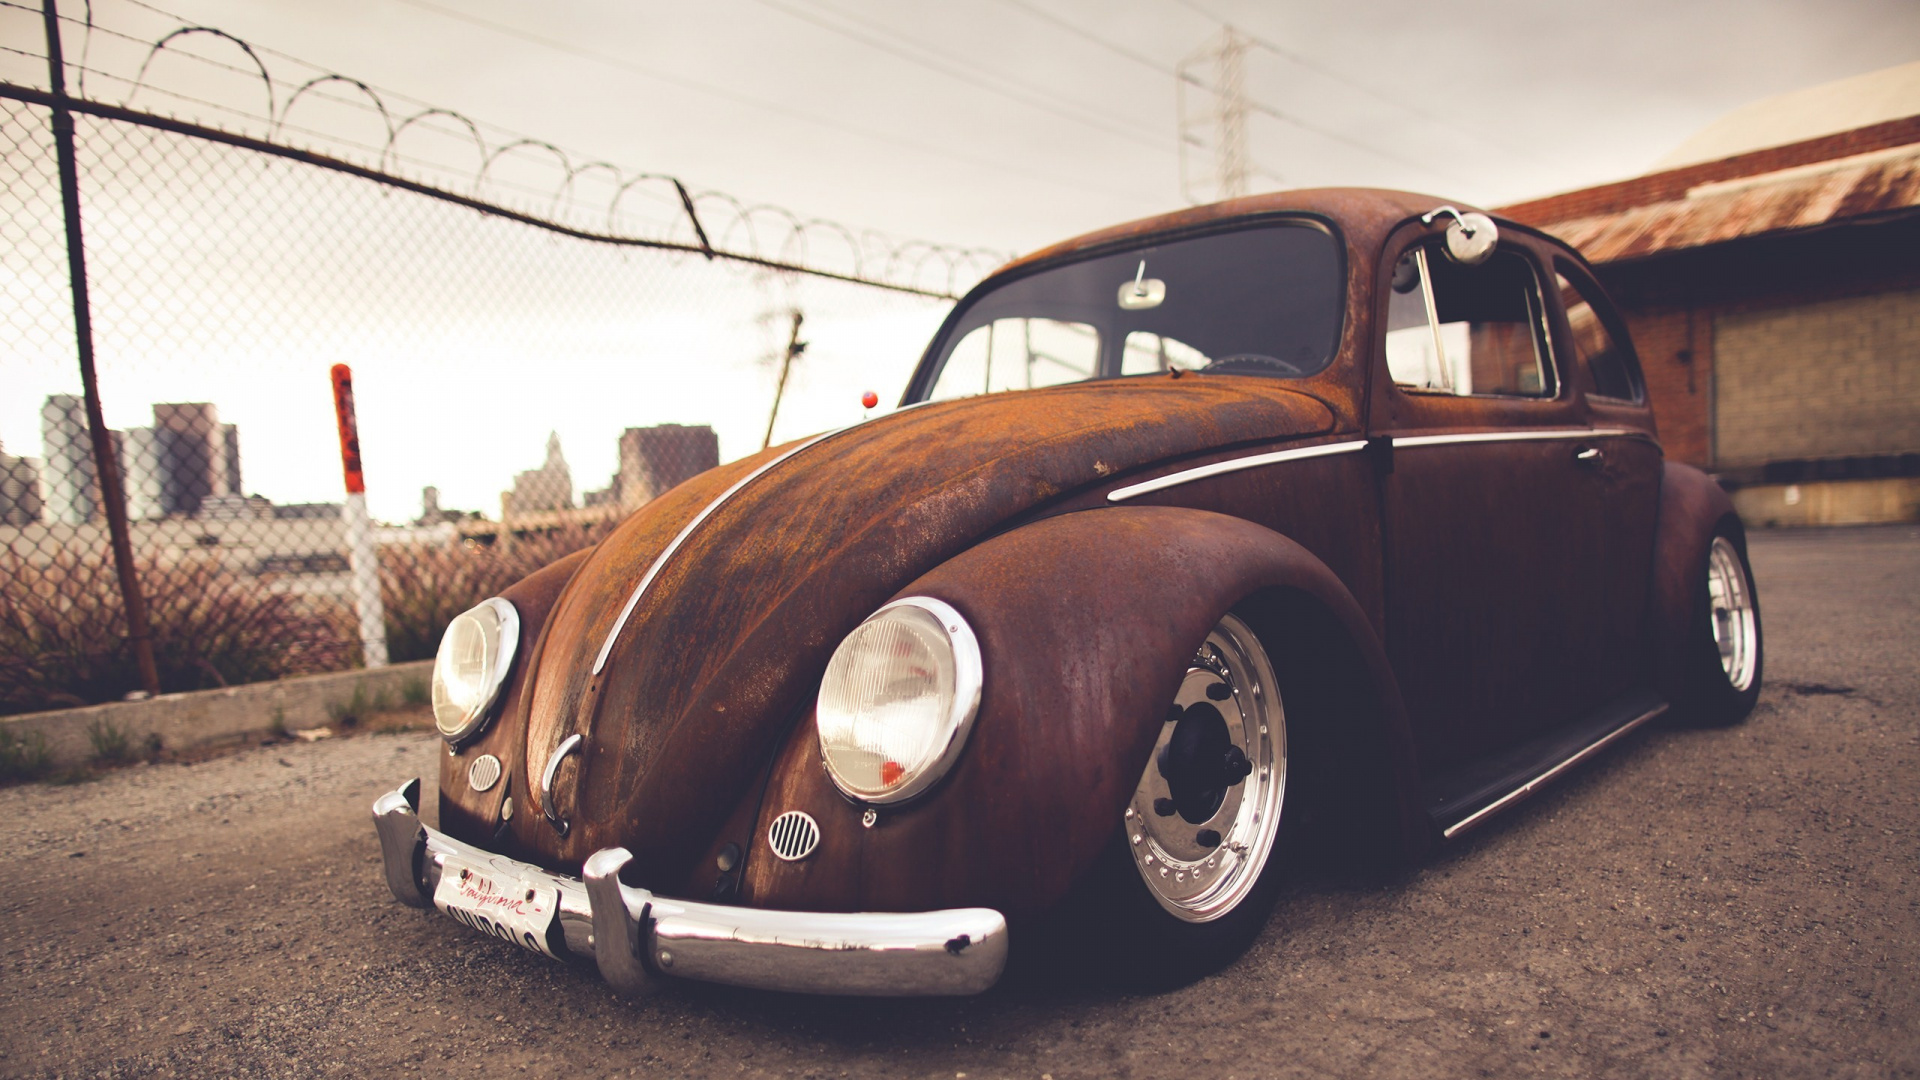 Brown Vintage Car on Gray Concrete Ground. Wallpaper in 1920x1080 Resolution